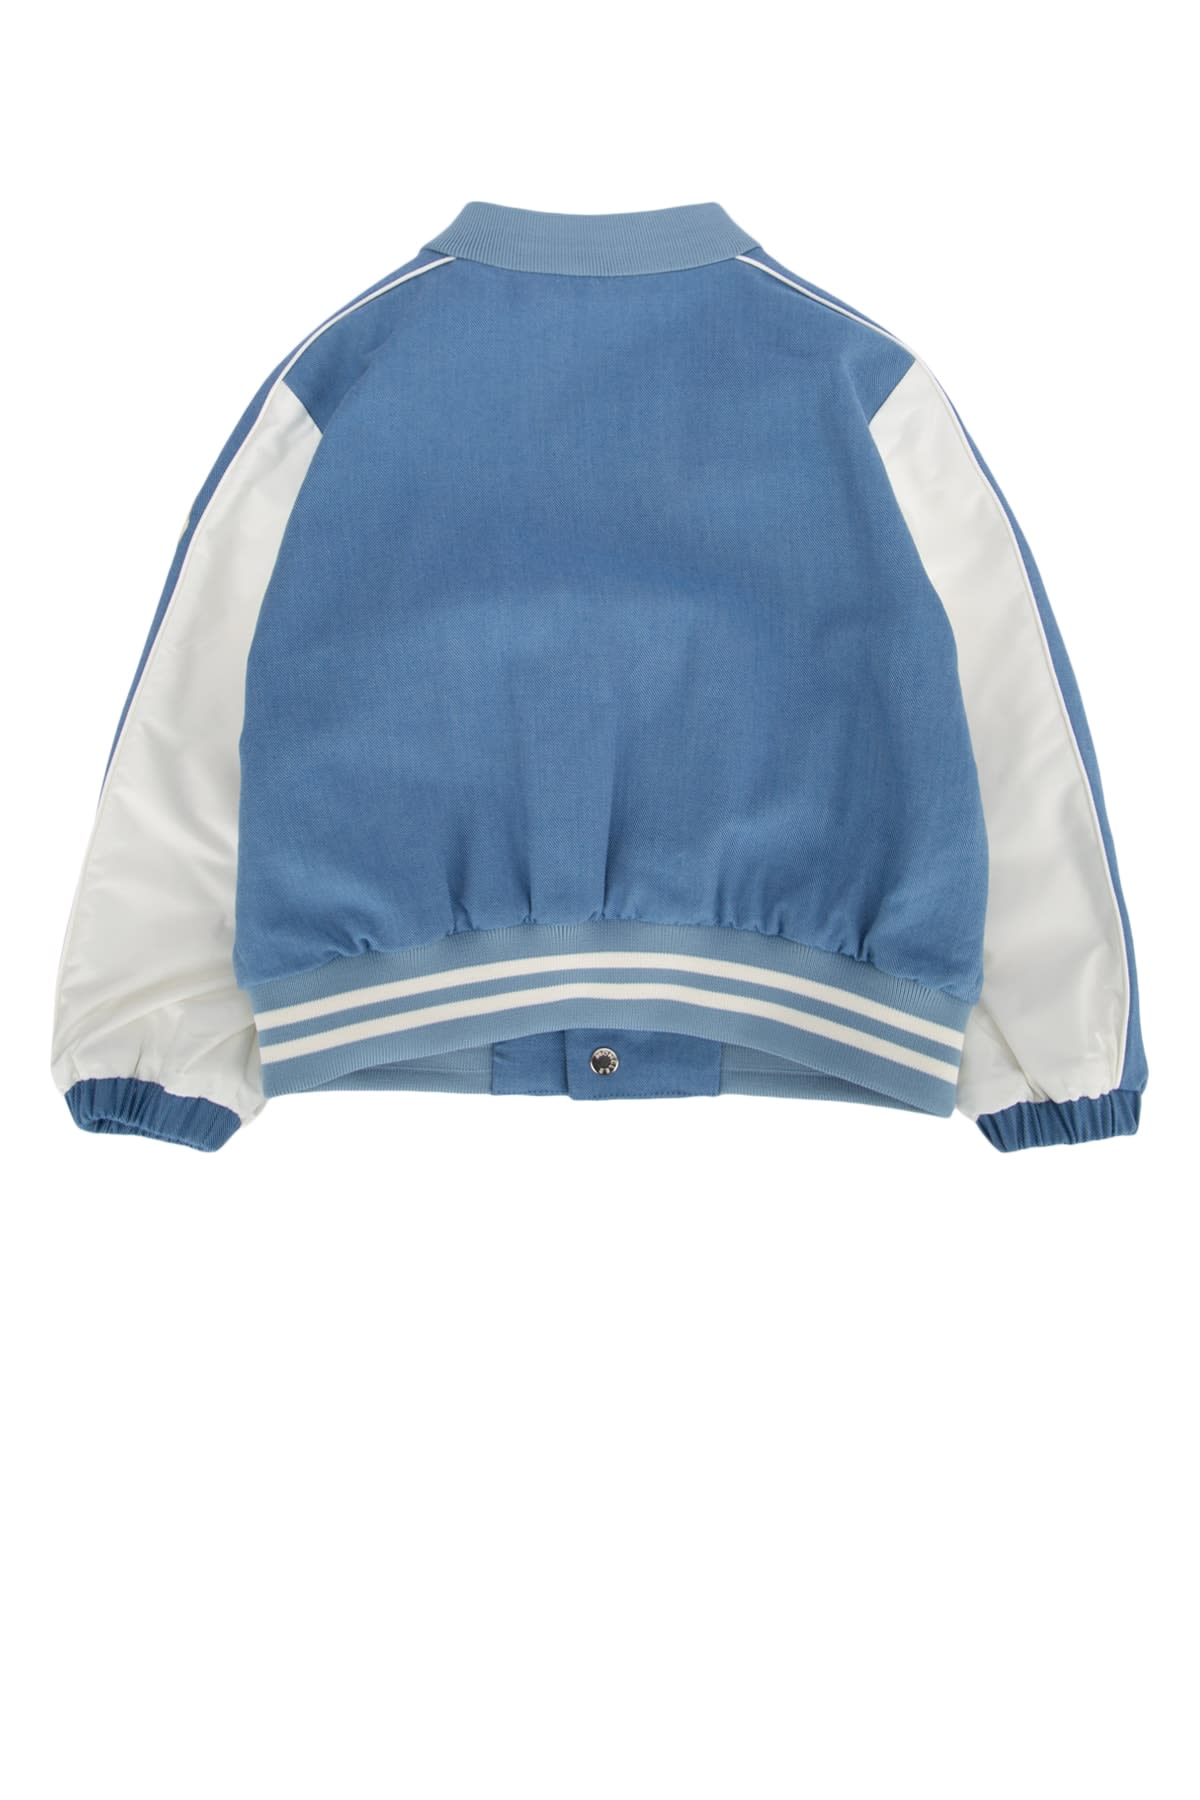 Moncler Kids' Cappotto In 71o